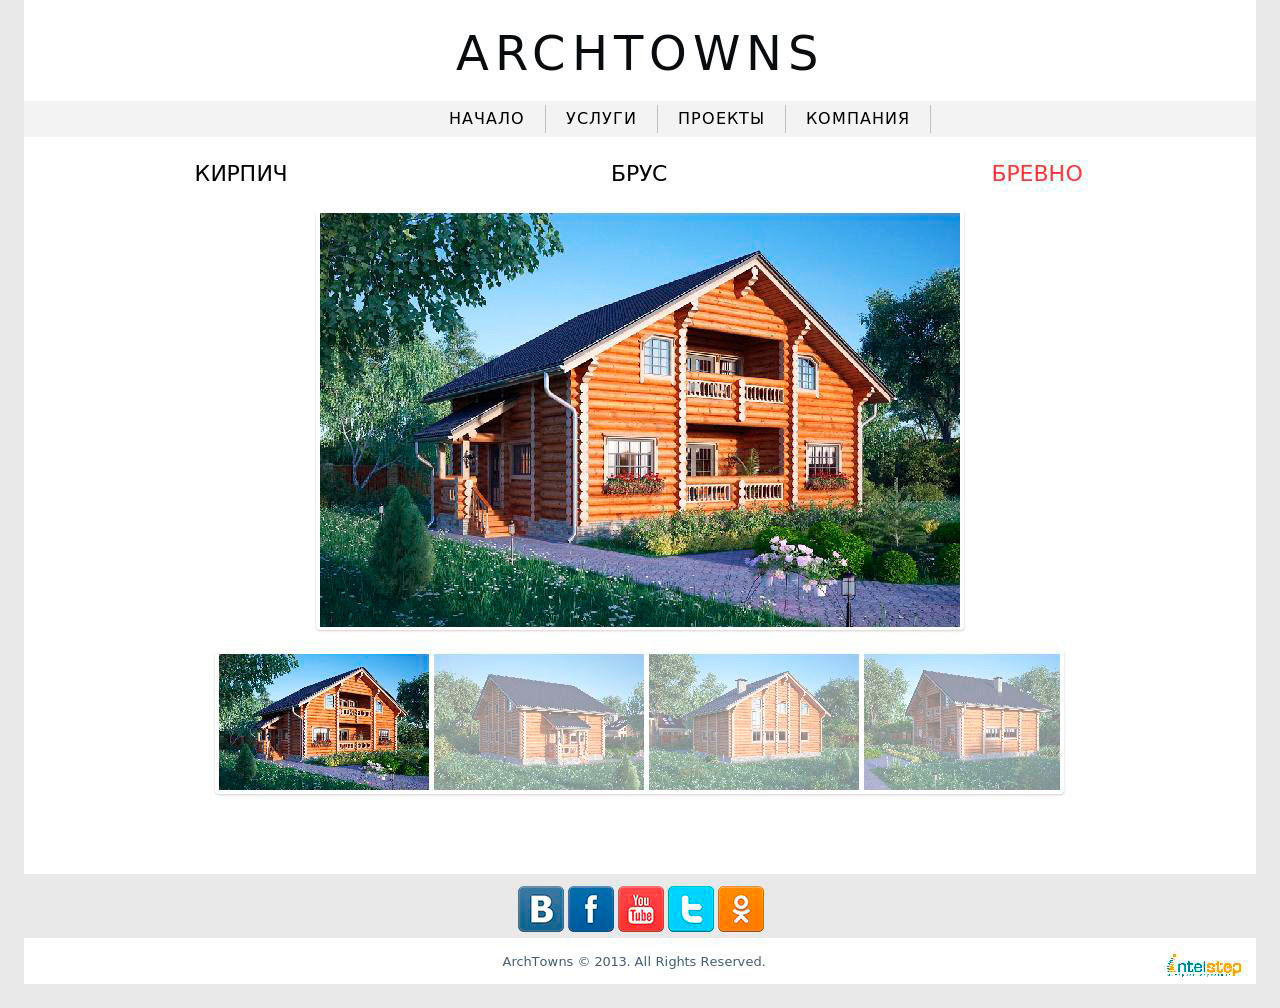 Archtowns